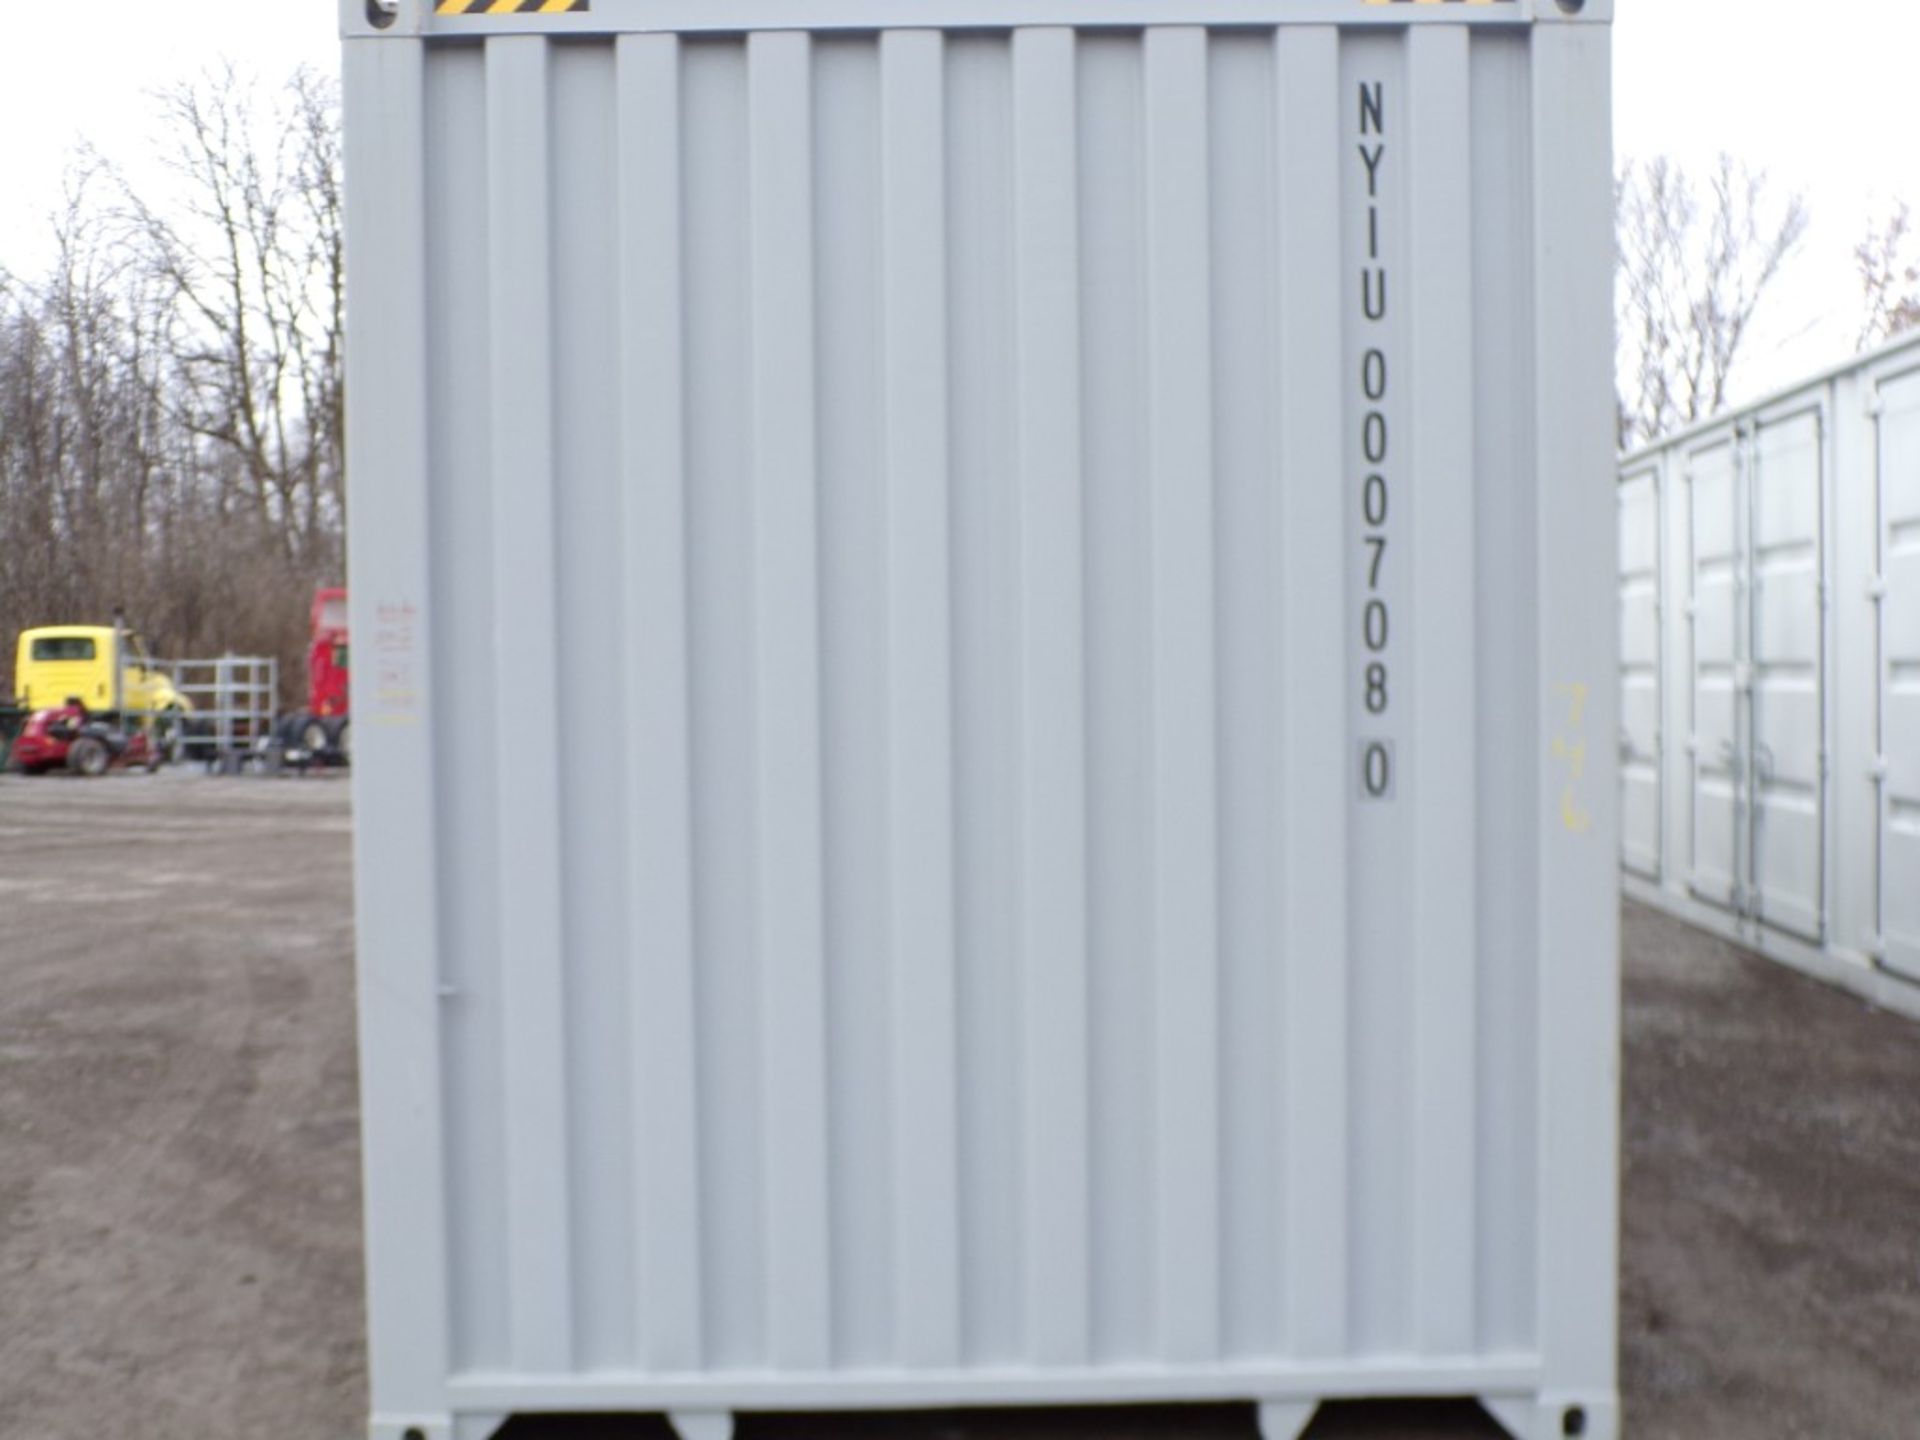 New Gray 40' Storage Container, (2) Large Side Access Doors, Barn Doors in 1 End, Cont # NY0007080 - Image 2 of 2